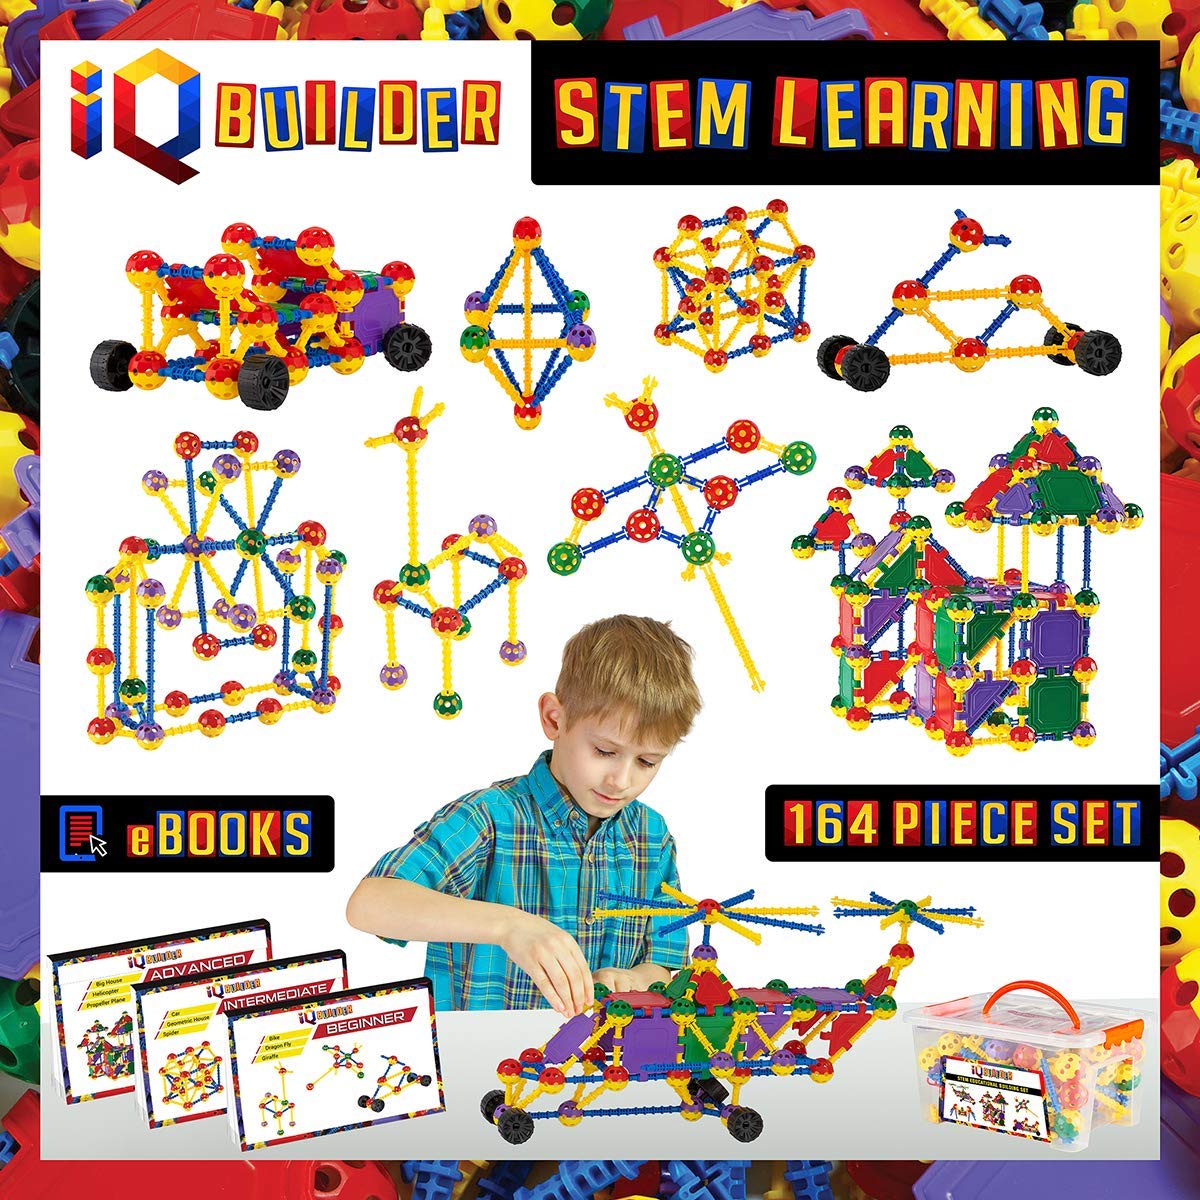 IQ BUILDER STEM Learning Toys For 7 Year Olds, 164-Piece Set